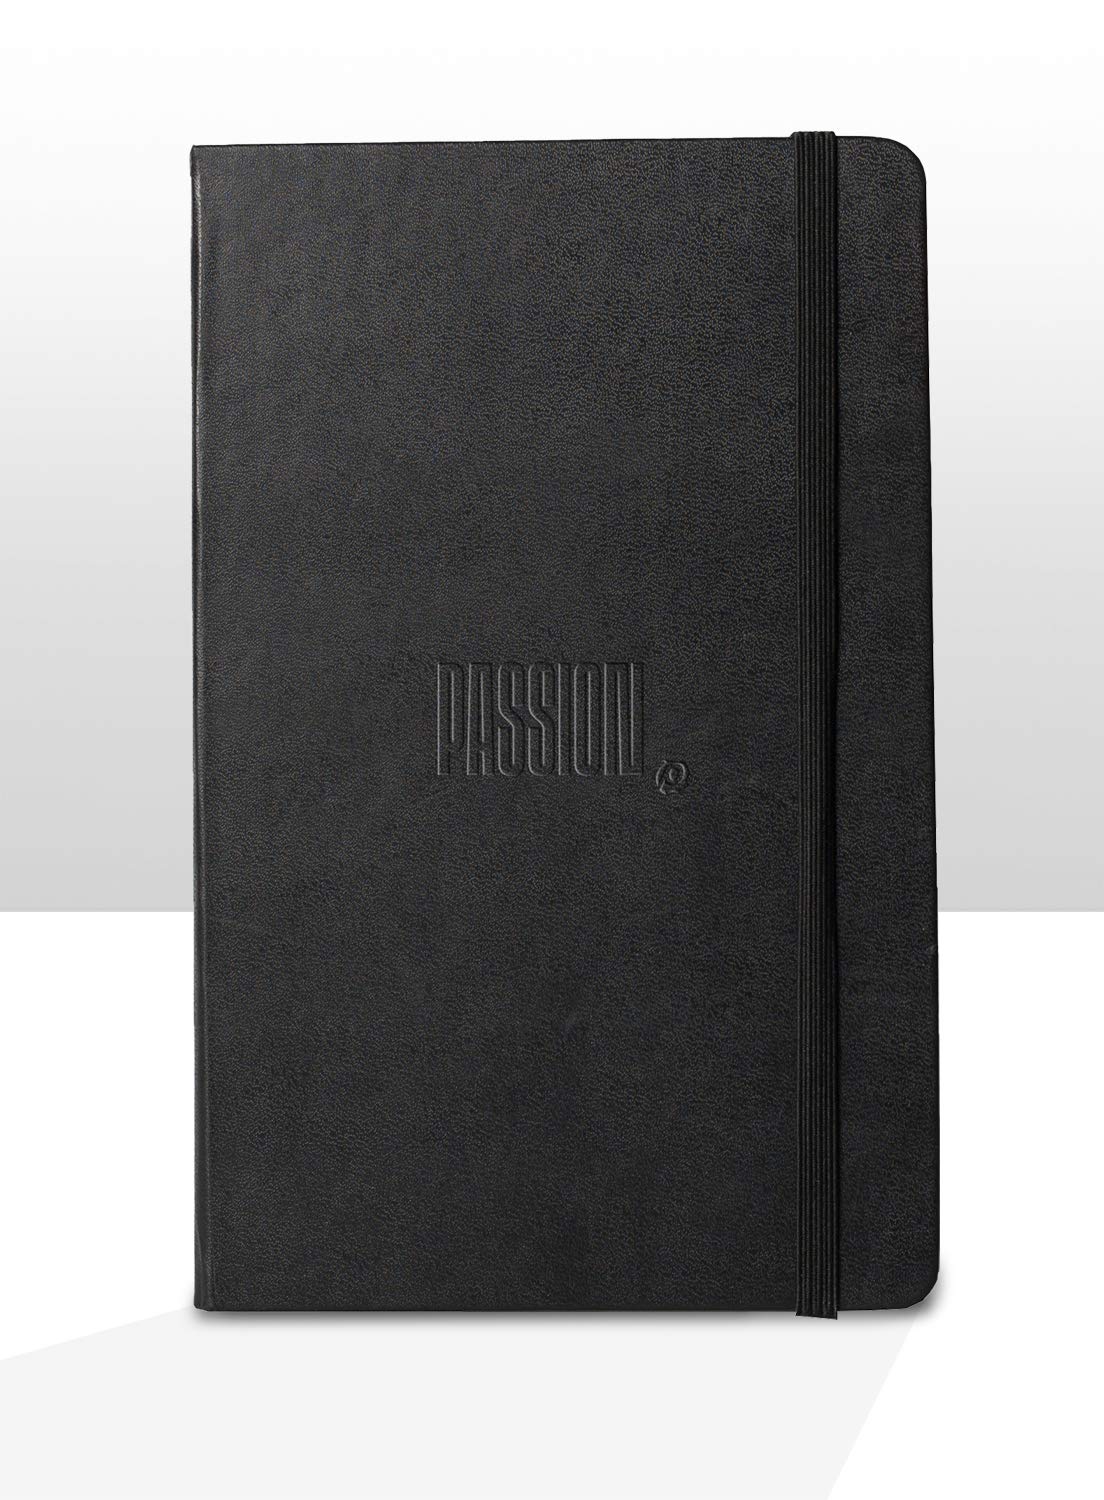 Passion Journal - Hardcover: Synthetic Hardcover 240 Lined Pages 5.25” x 8.25” Journal (Notebook, Diary) Hardcover – July 1, 2019 - Faith & Flame - Books and Gifts - Passion Publishing - 9781949255065